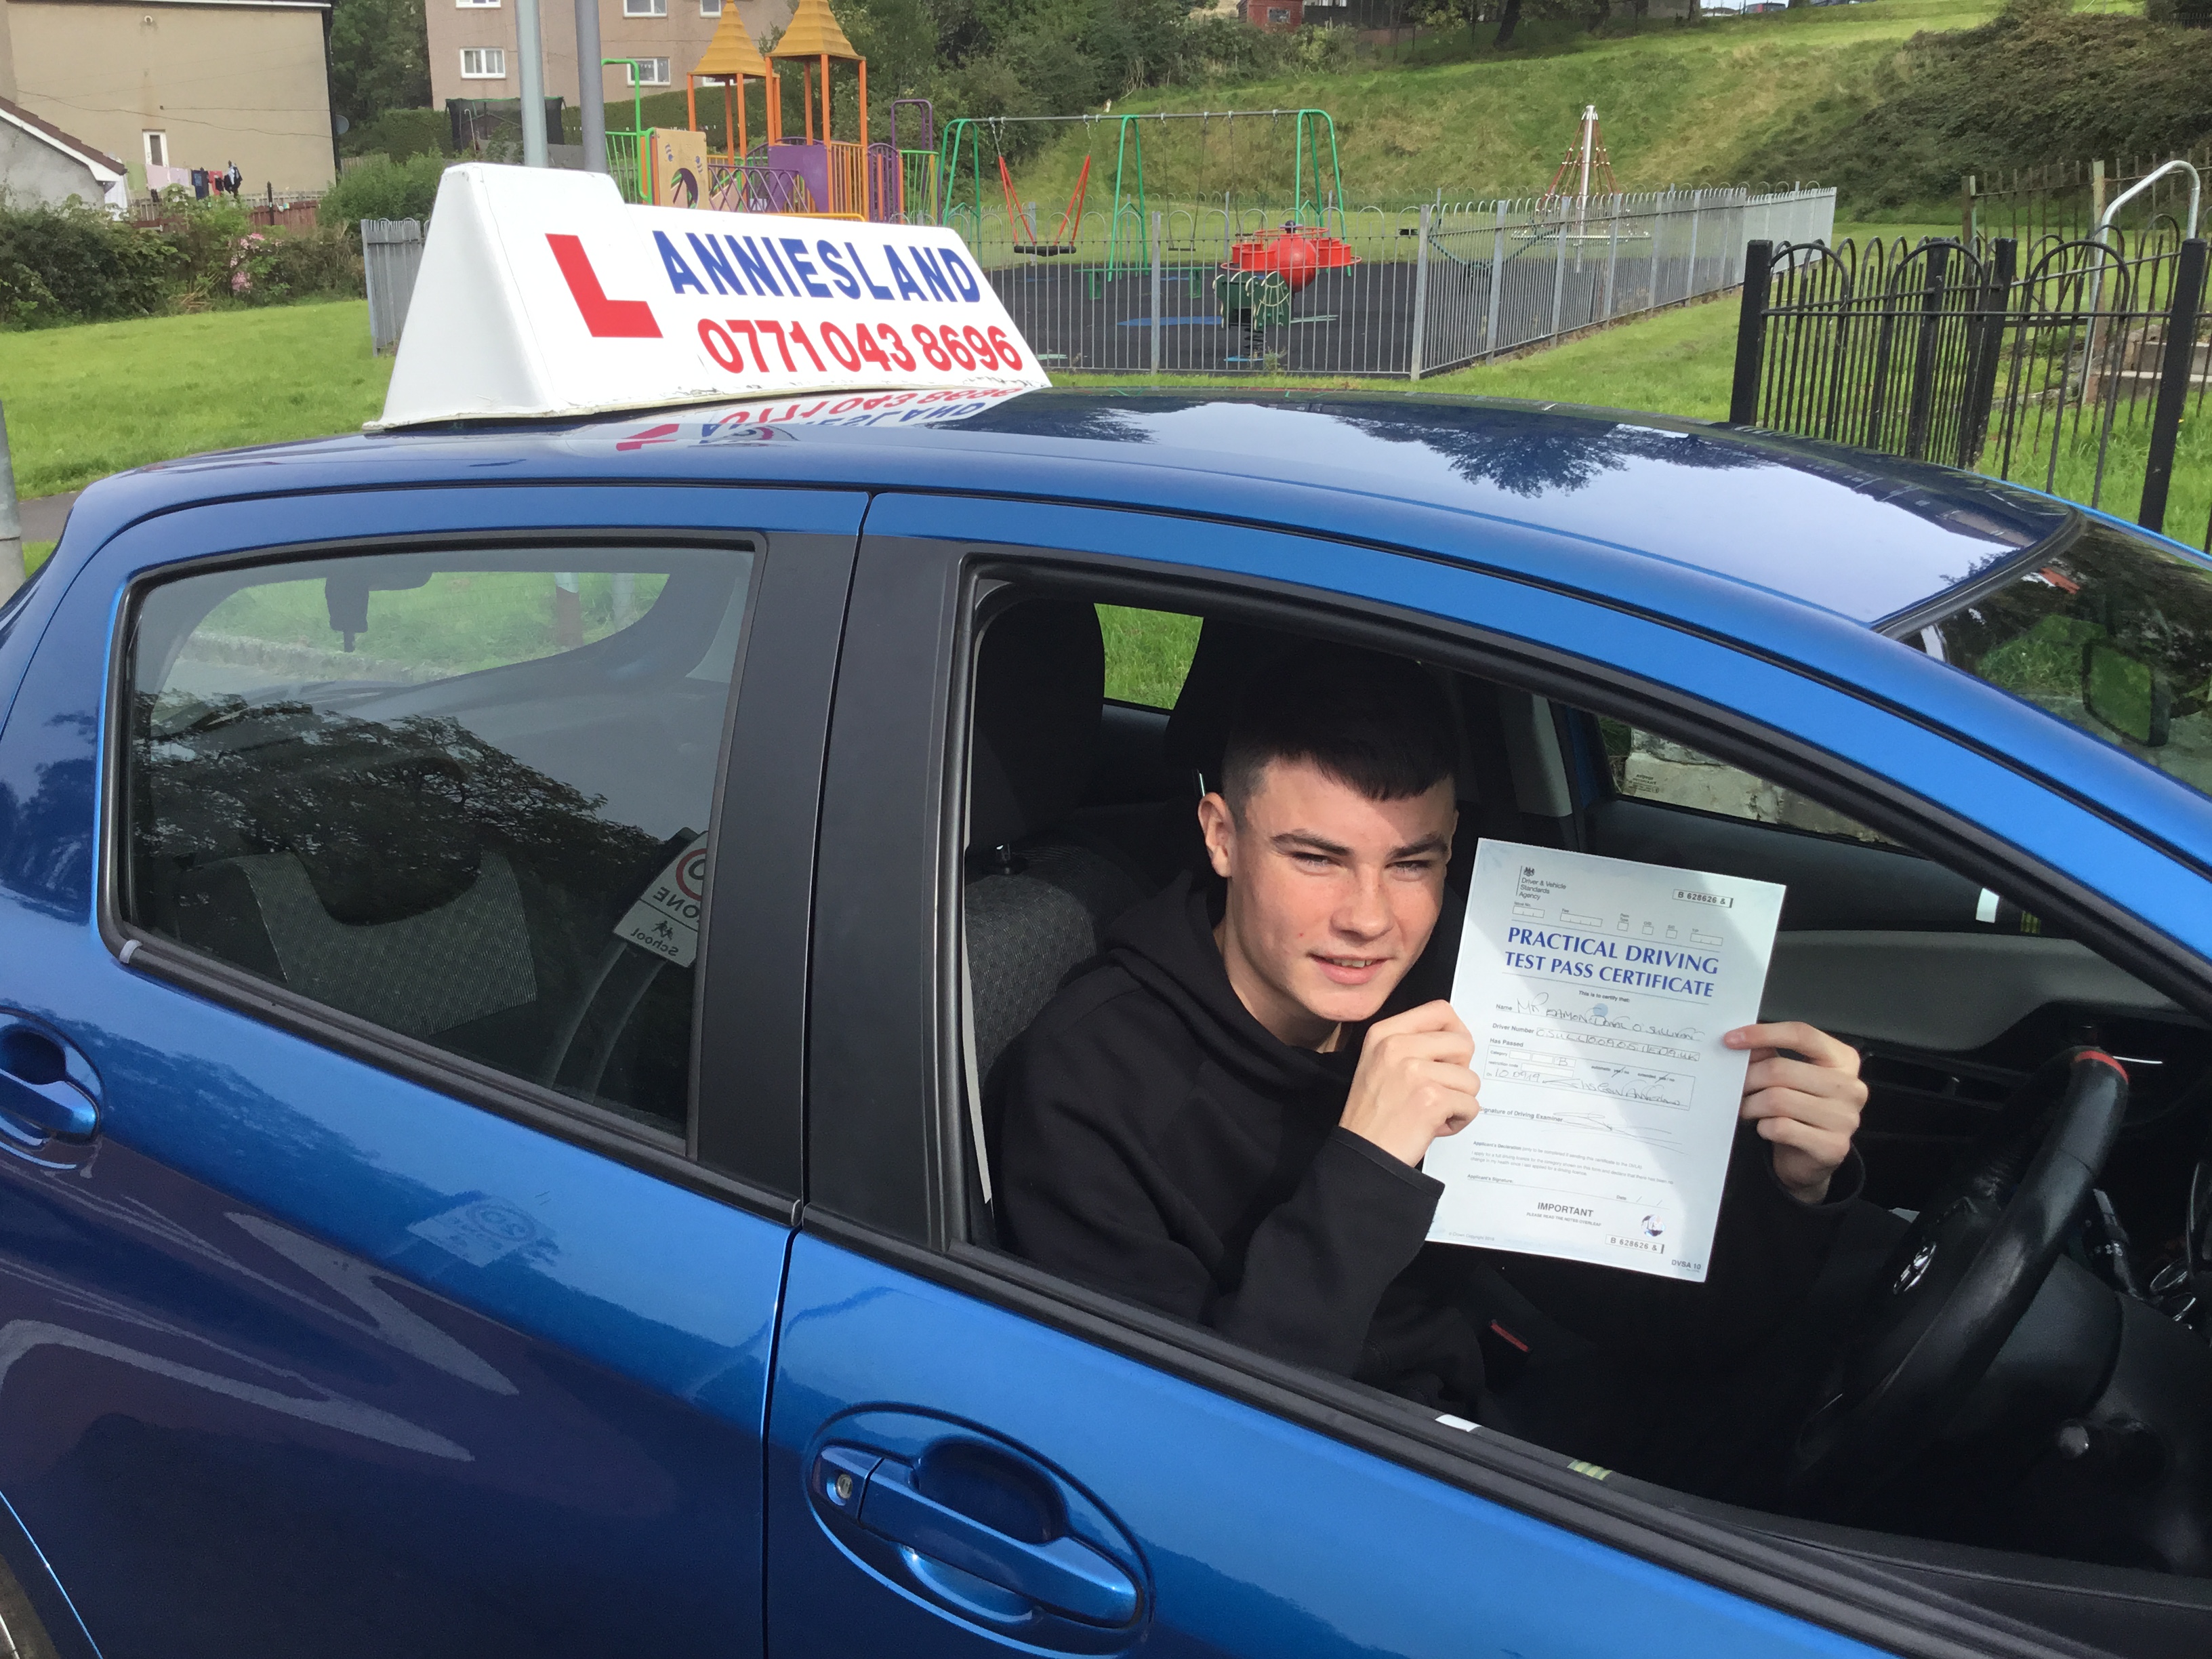 Eamon  successfully passed their driving test with Anniesland Driving School